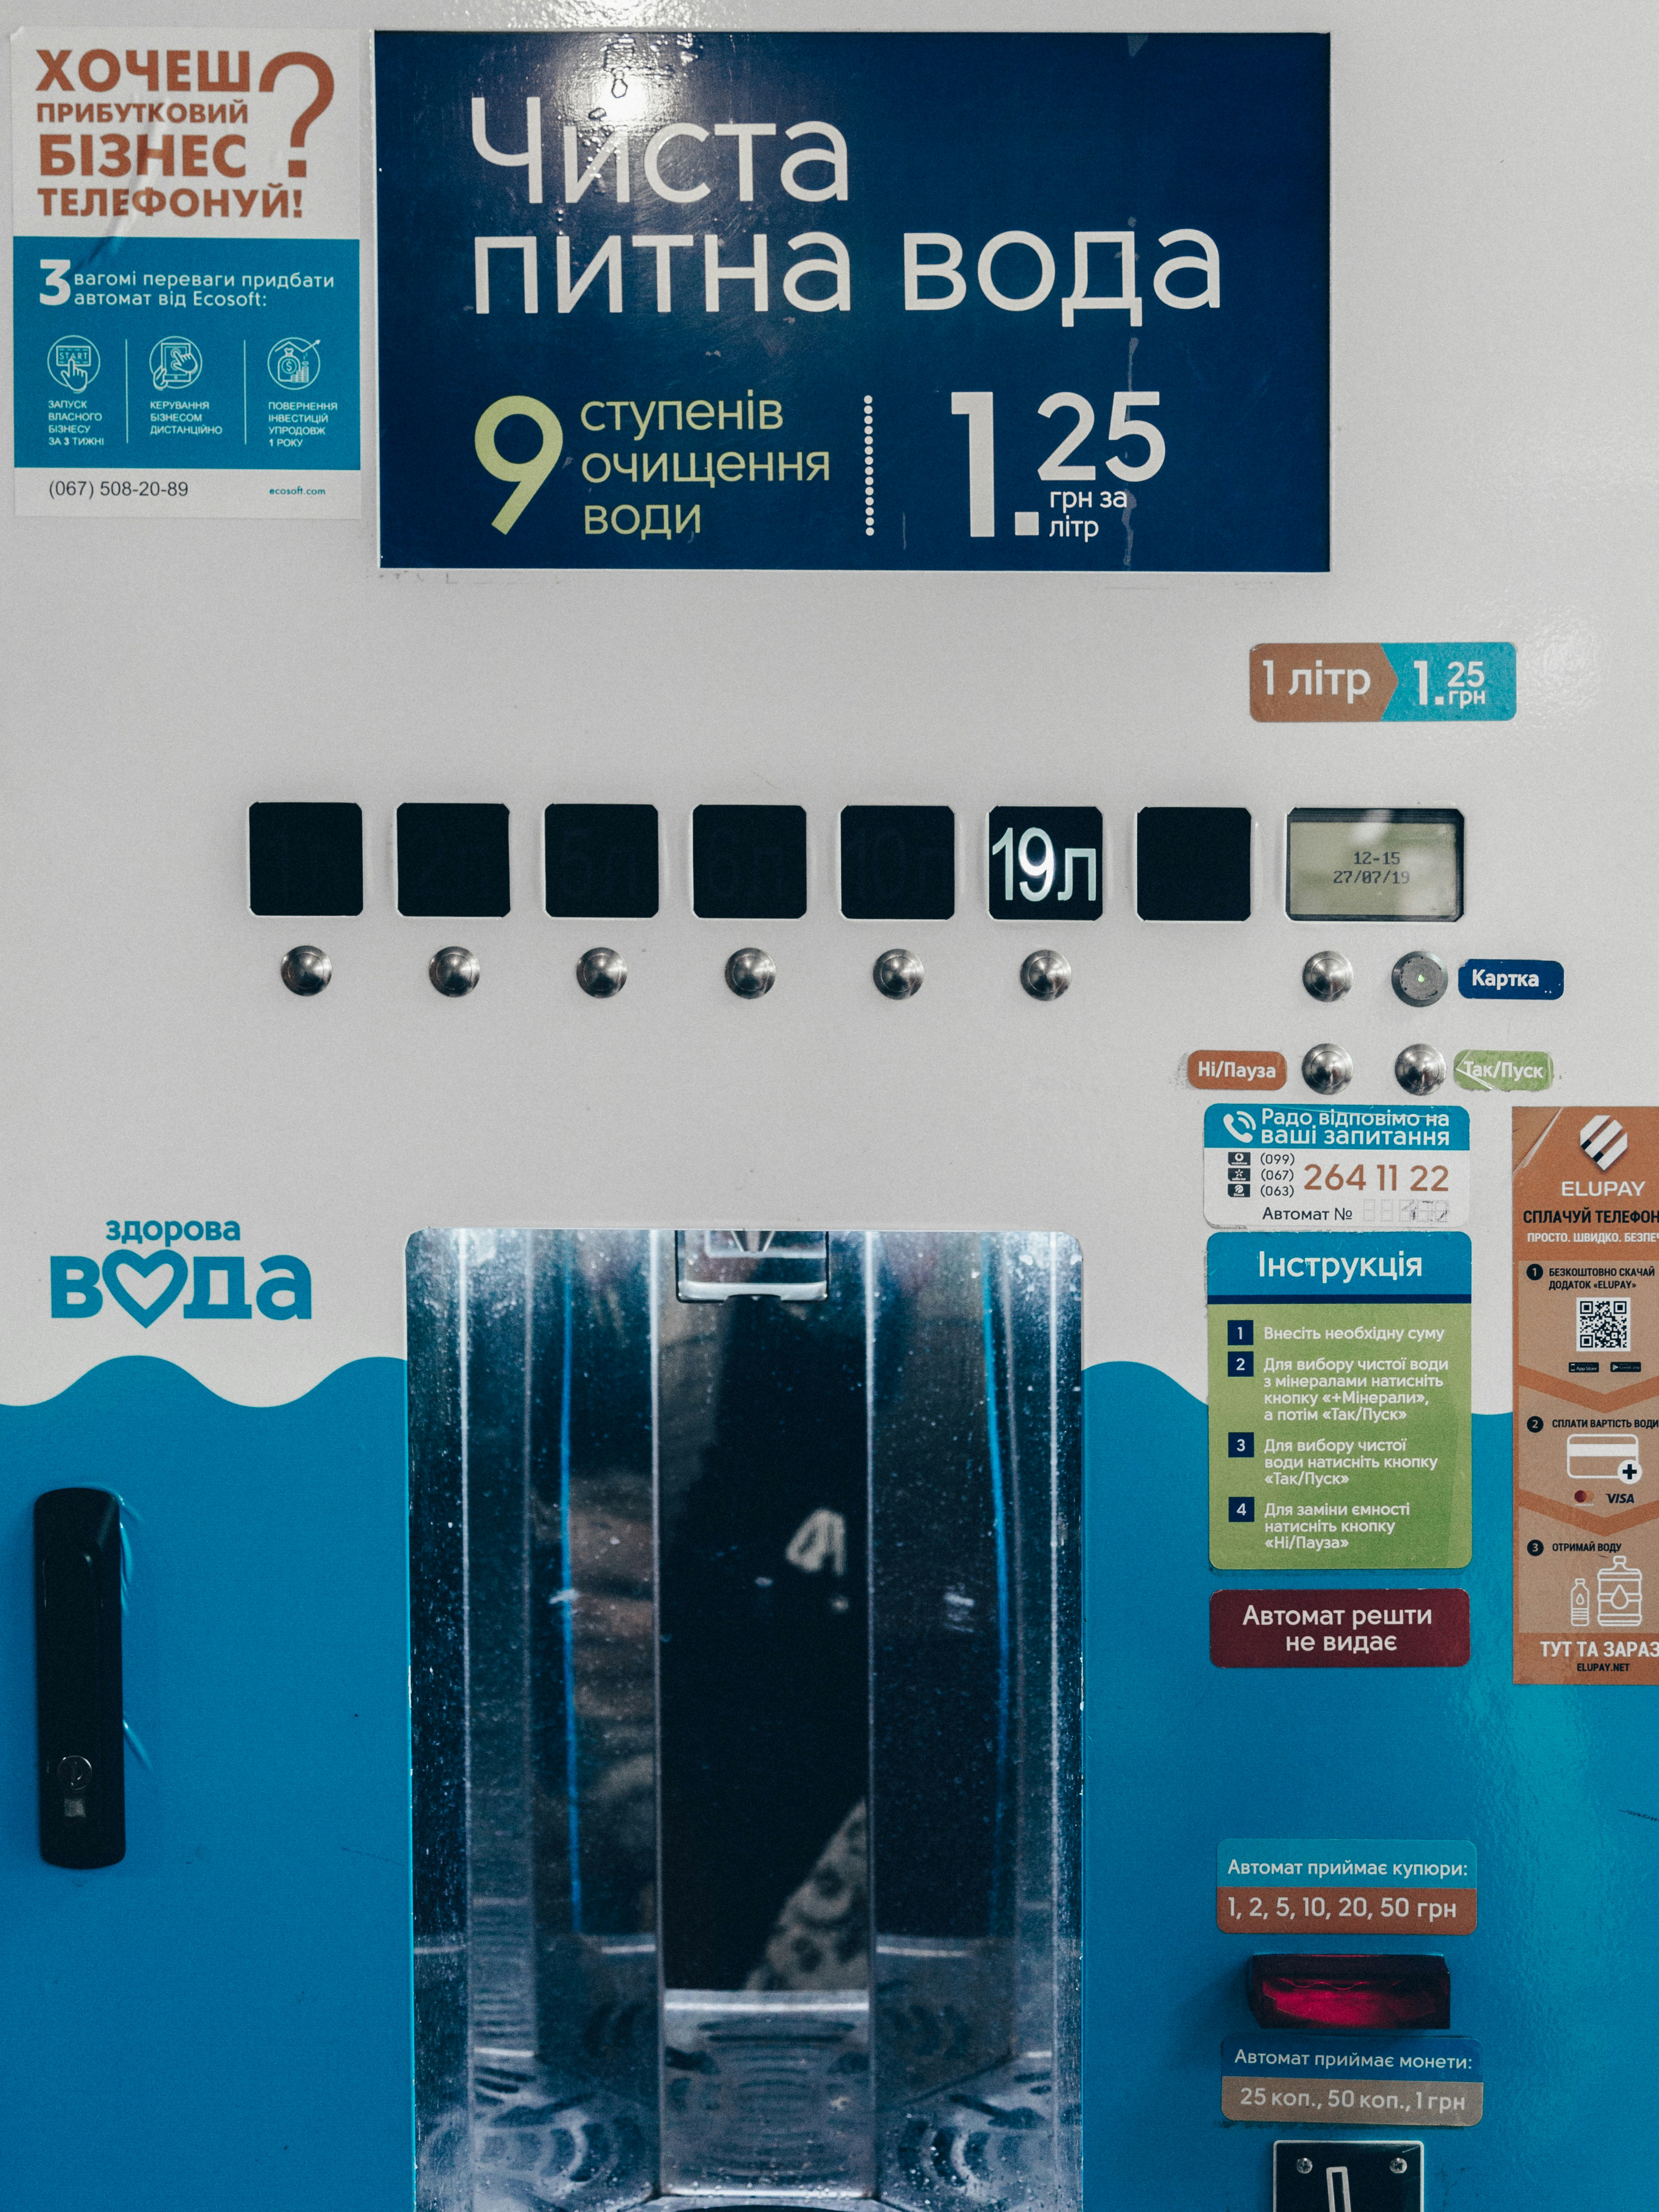 Vending machine for drinking water